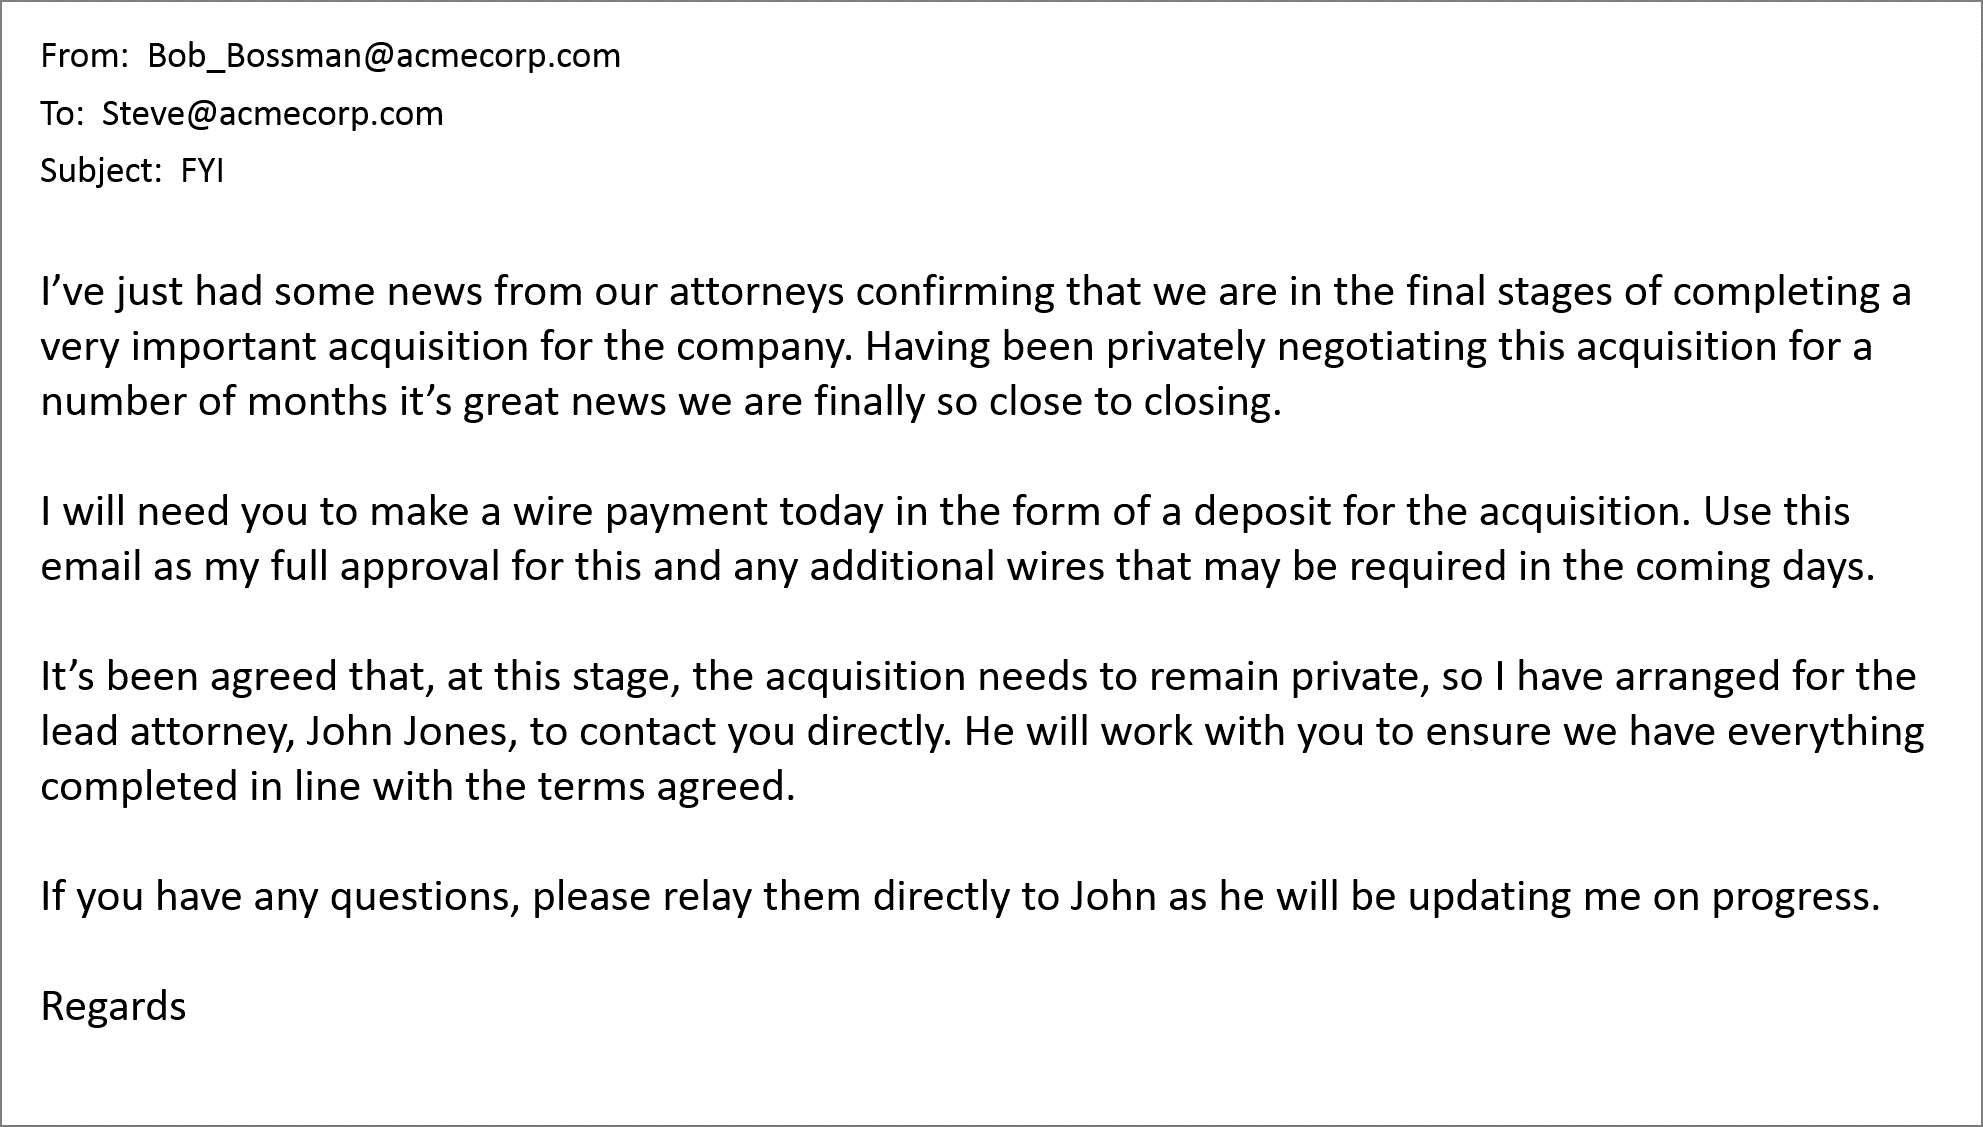 Fake business email compromise (BEC) email from a false approving personality